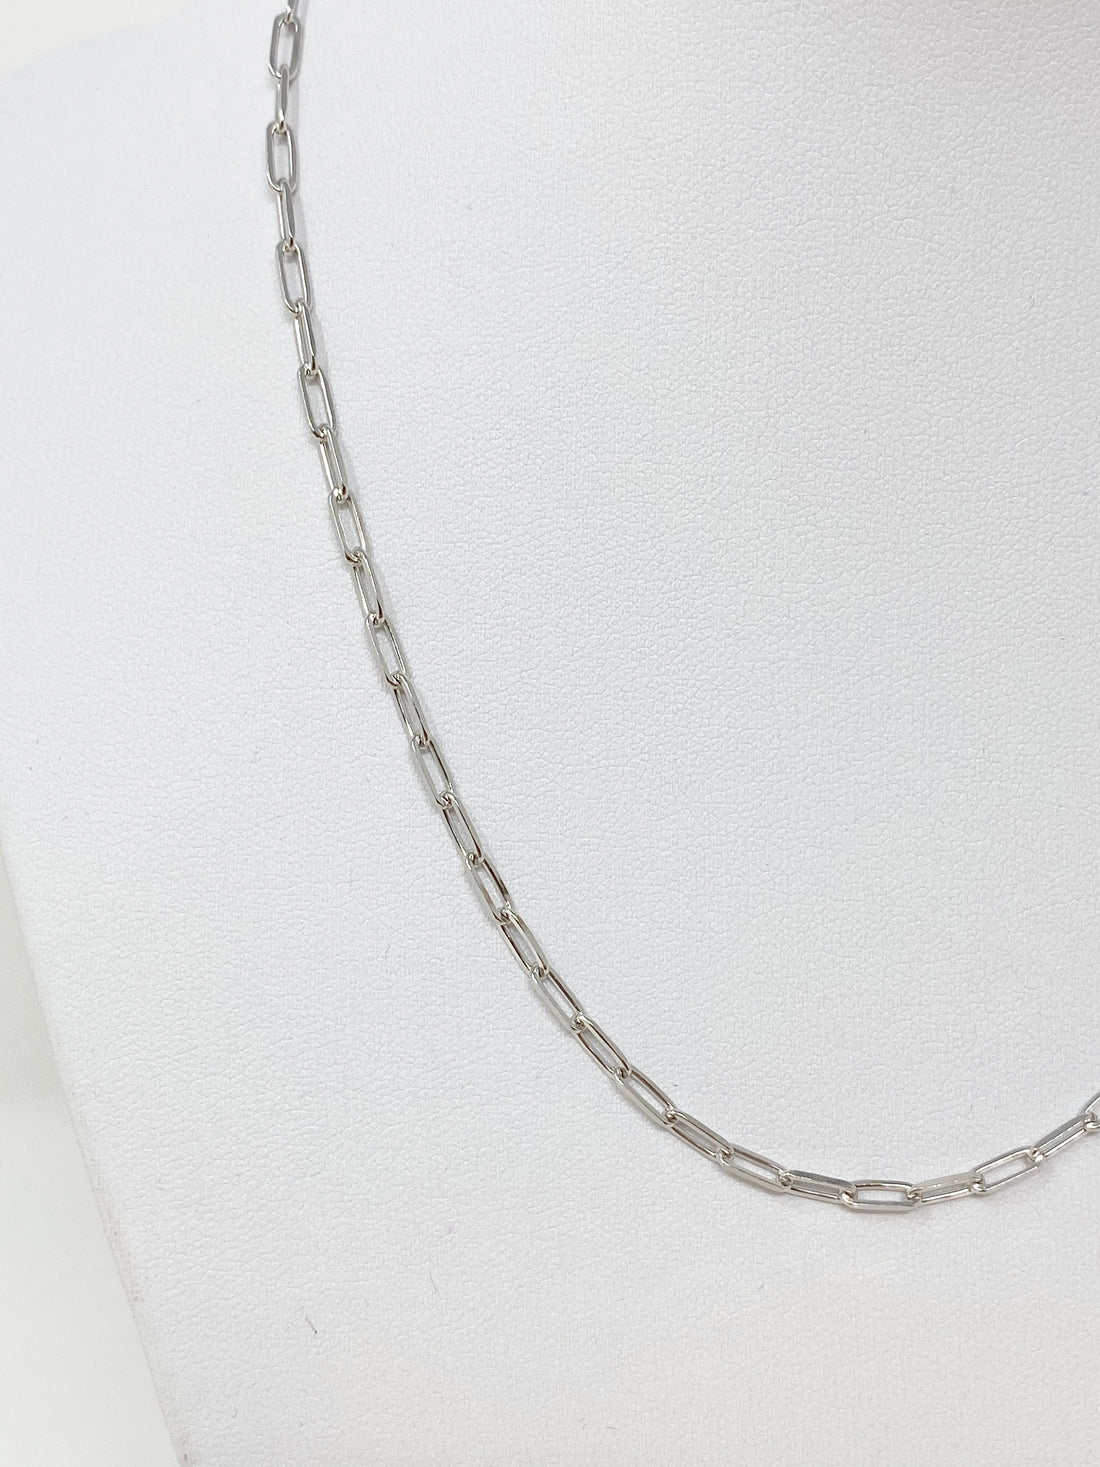 Charming Chainlink Necklace in Silver 16"